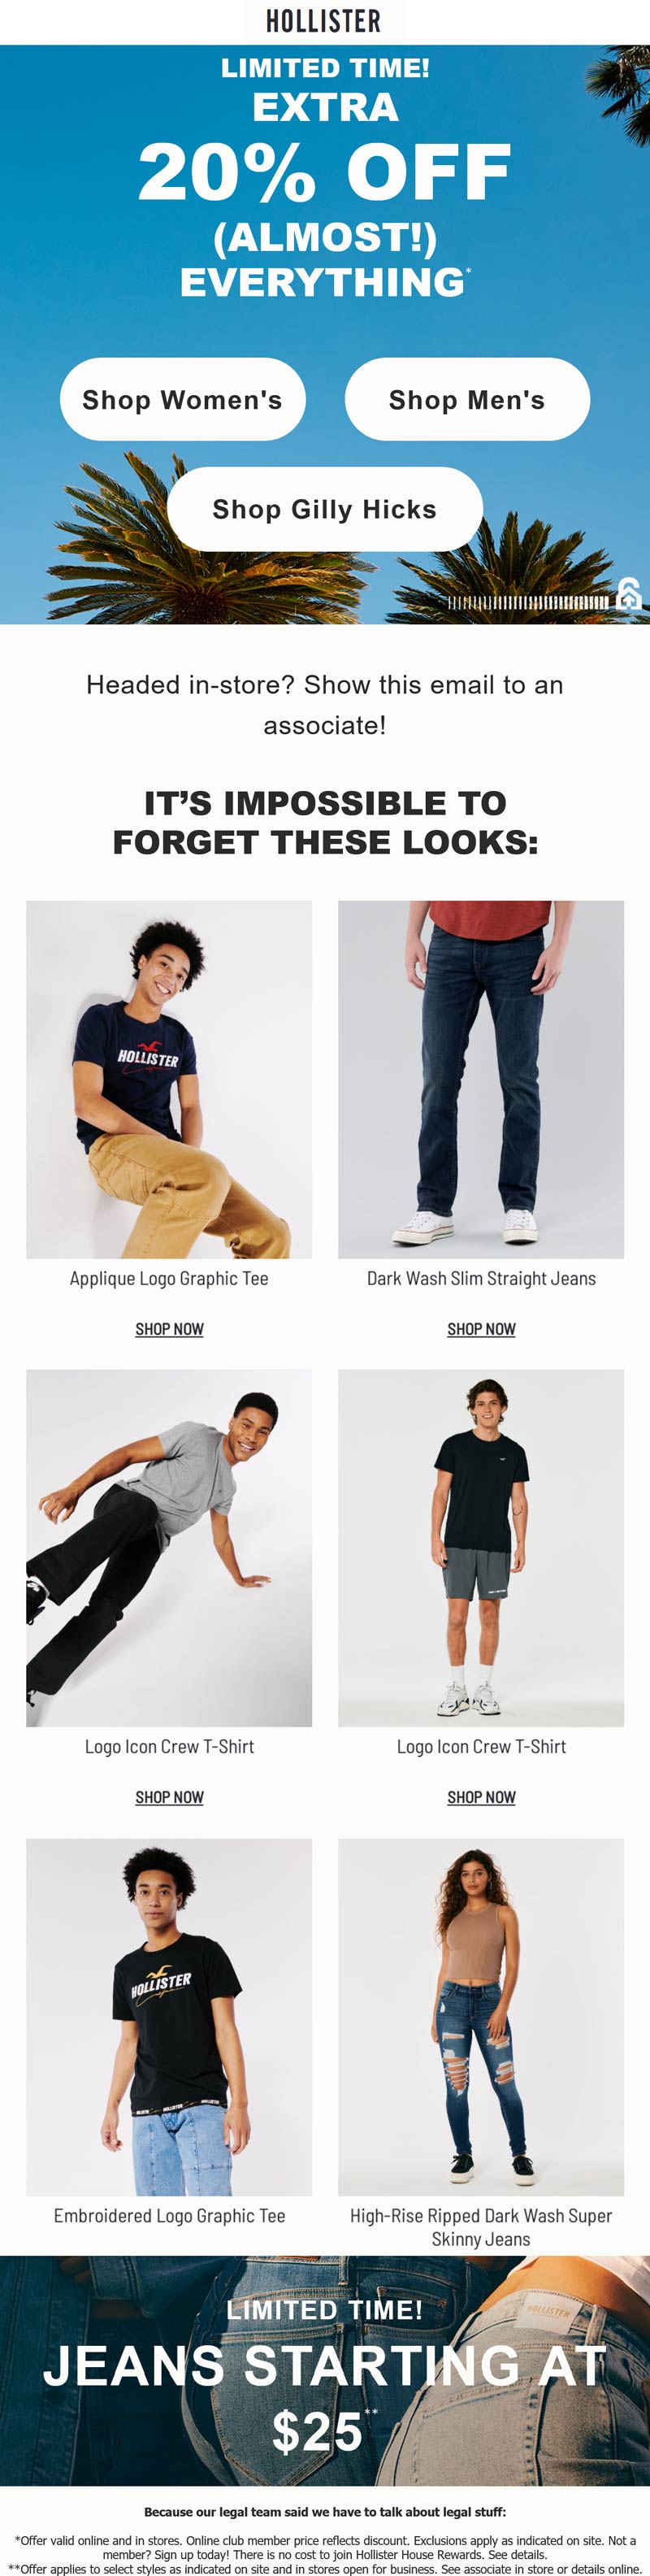 Hollister stores Coupon  Extra 20% off everything at Hollister, ditto logged in online #hollister 